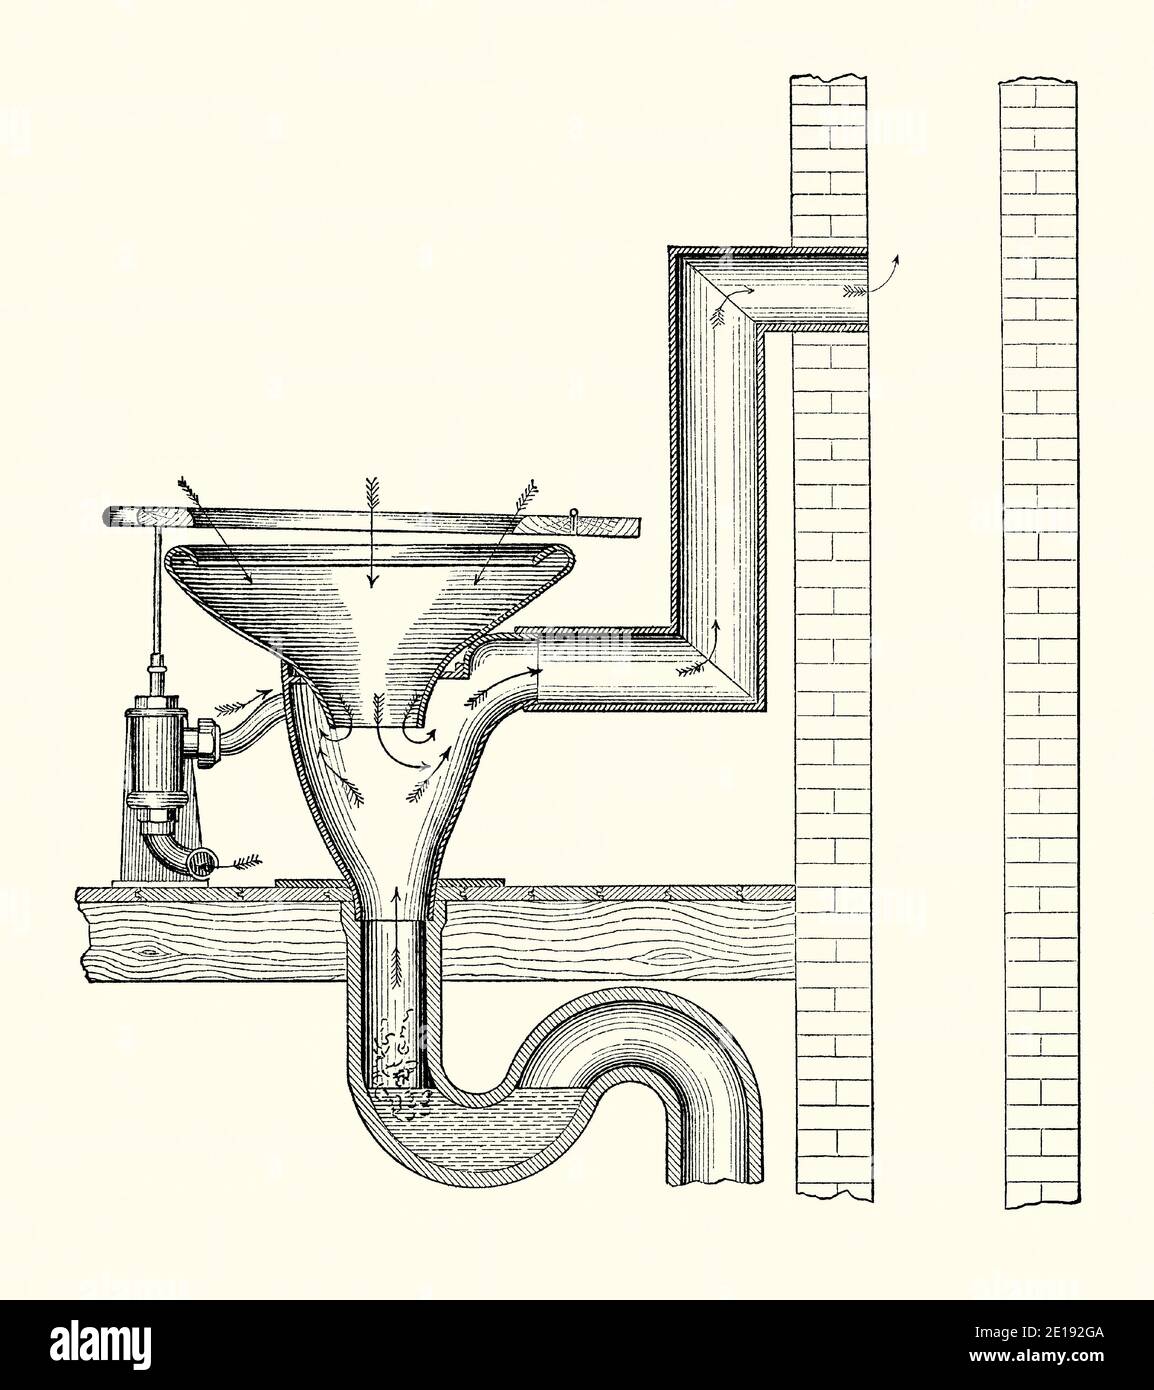 An old engraving showing the workings of a Victorian flushing toilet (flush toilet, water closet, WC). It is from a book of the 1880s. Here ‘Smith’s ventilating water closet’ provides an air pipe carrying foul air to a flu. A venting ‘soilpipe’ on could also be used for this purpose. Water to flush is delivered (left) by a pipe operated by lifting the seat. A flushing toilet disposes of human waste by using water to flush it through a drainpipe for disposal. Flush toilets usually incorporate a bend (trap or U-bend) where water collects in the bowl, to hold the waste and to seal against smells. Stock Photo